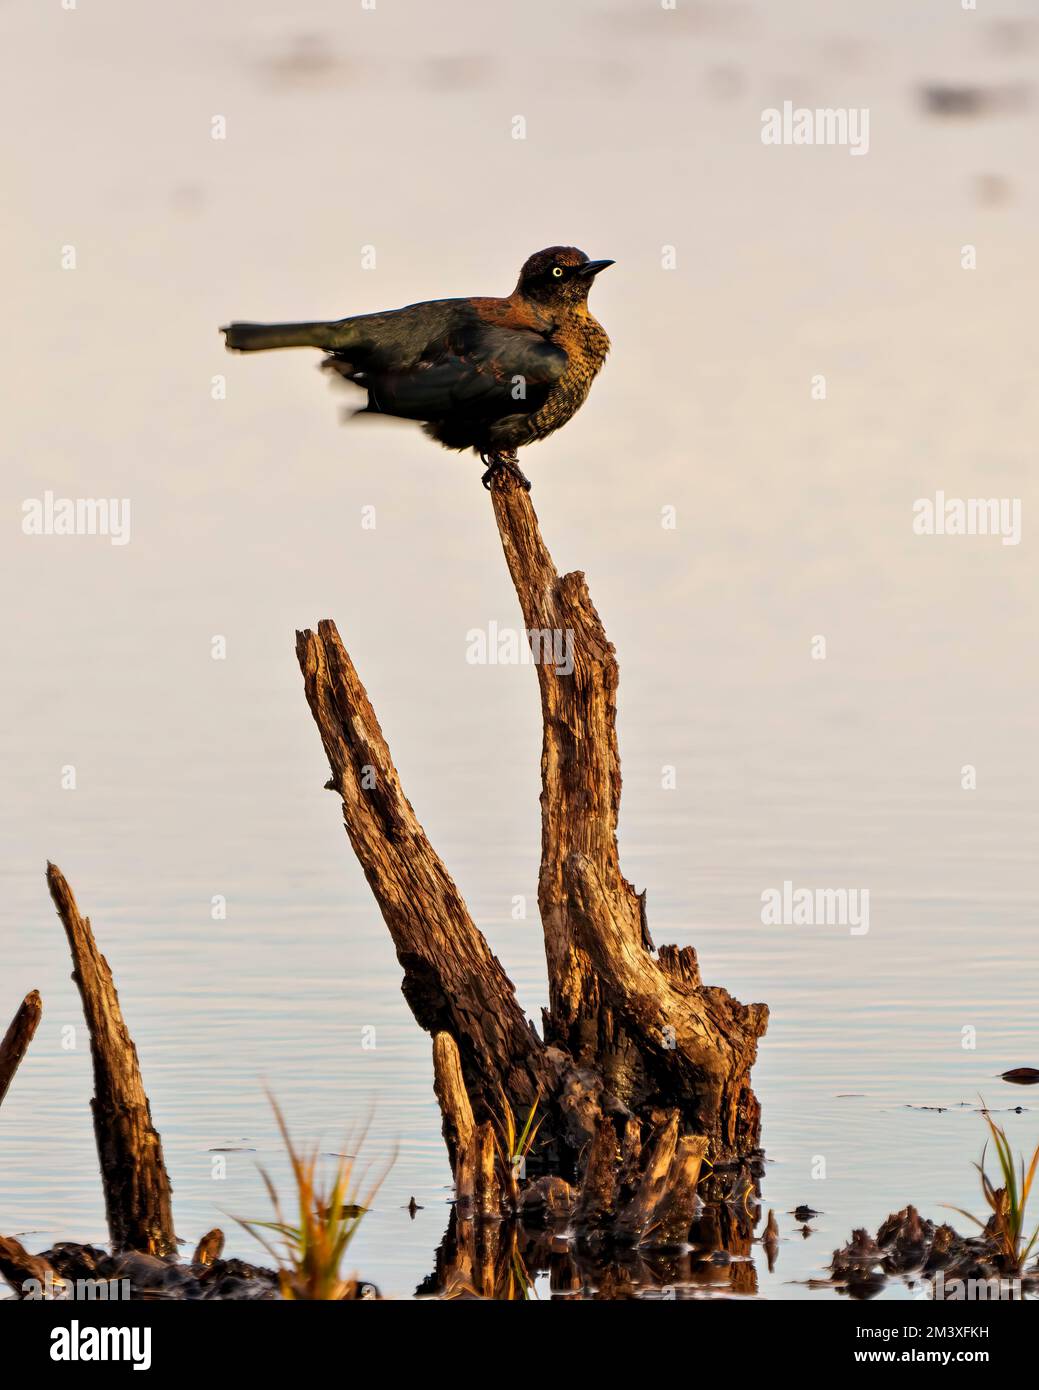 Rusty Blackbird perched on a stump in a marsh in its environment and habitat surrounding in North Ontario Canada. Declining species. Threatened. Stock Photo